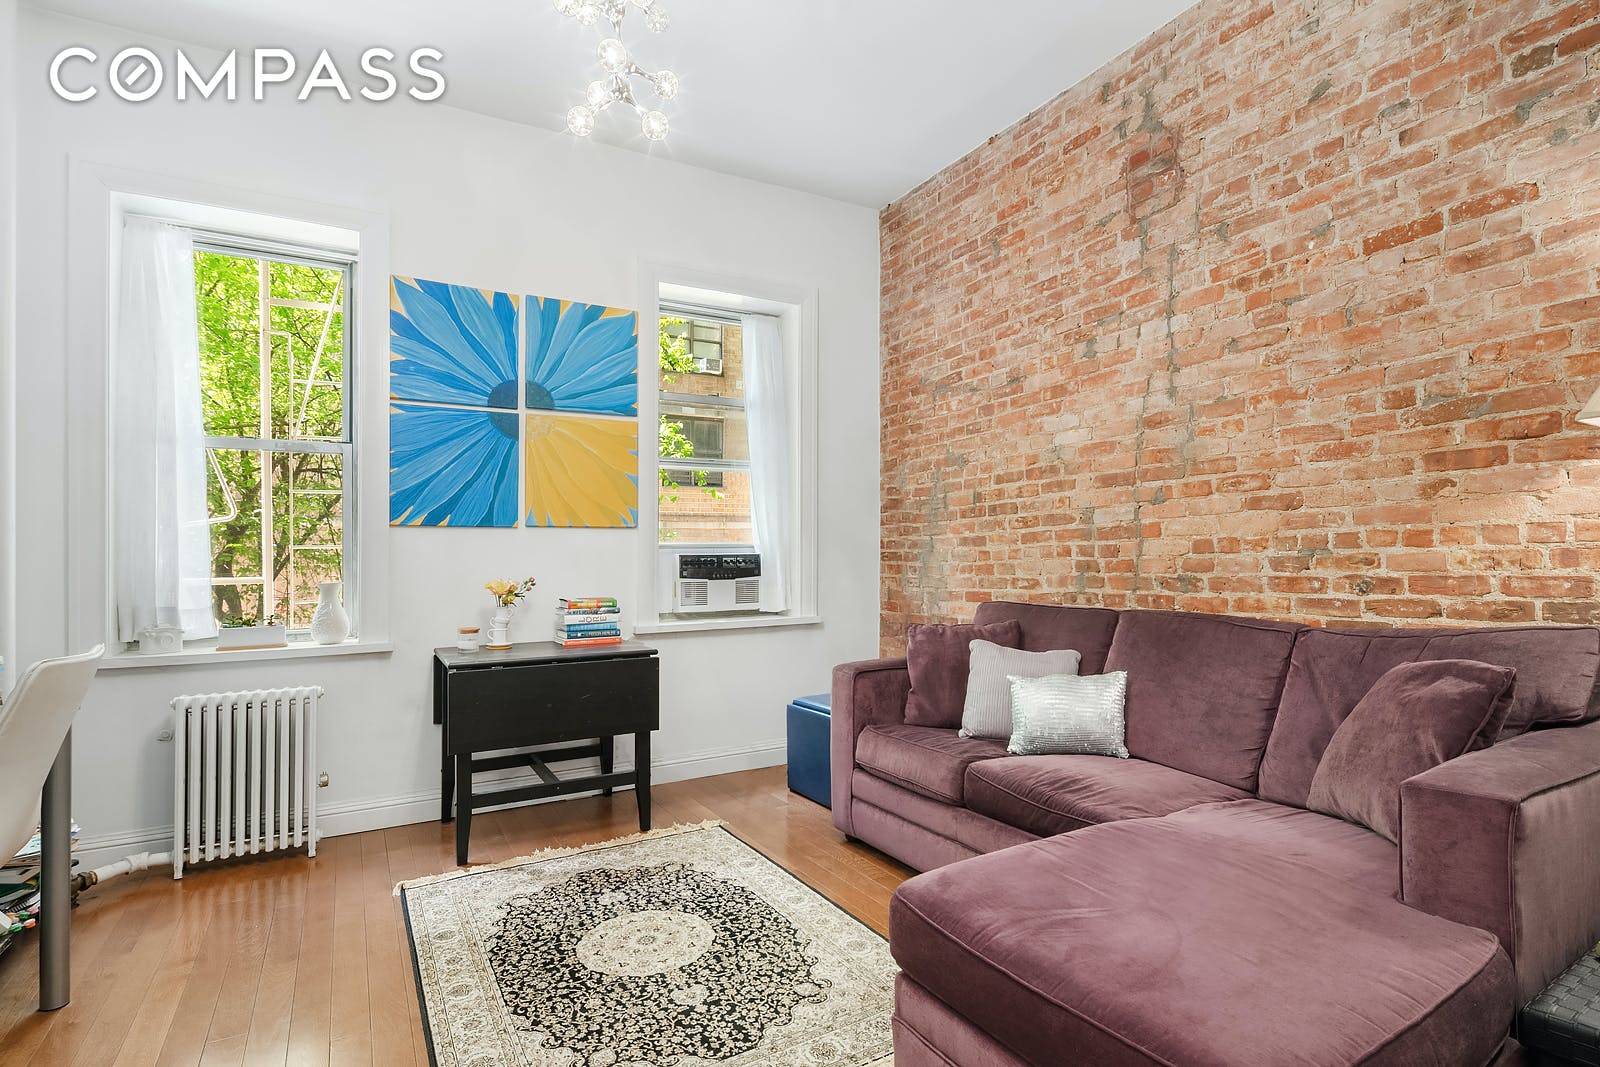 Welcome home to this parlor floor one bedroom residence in the historic East Village.